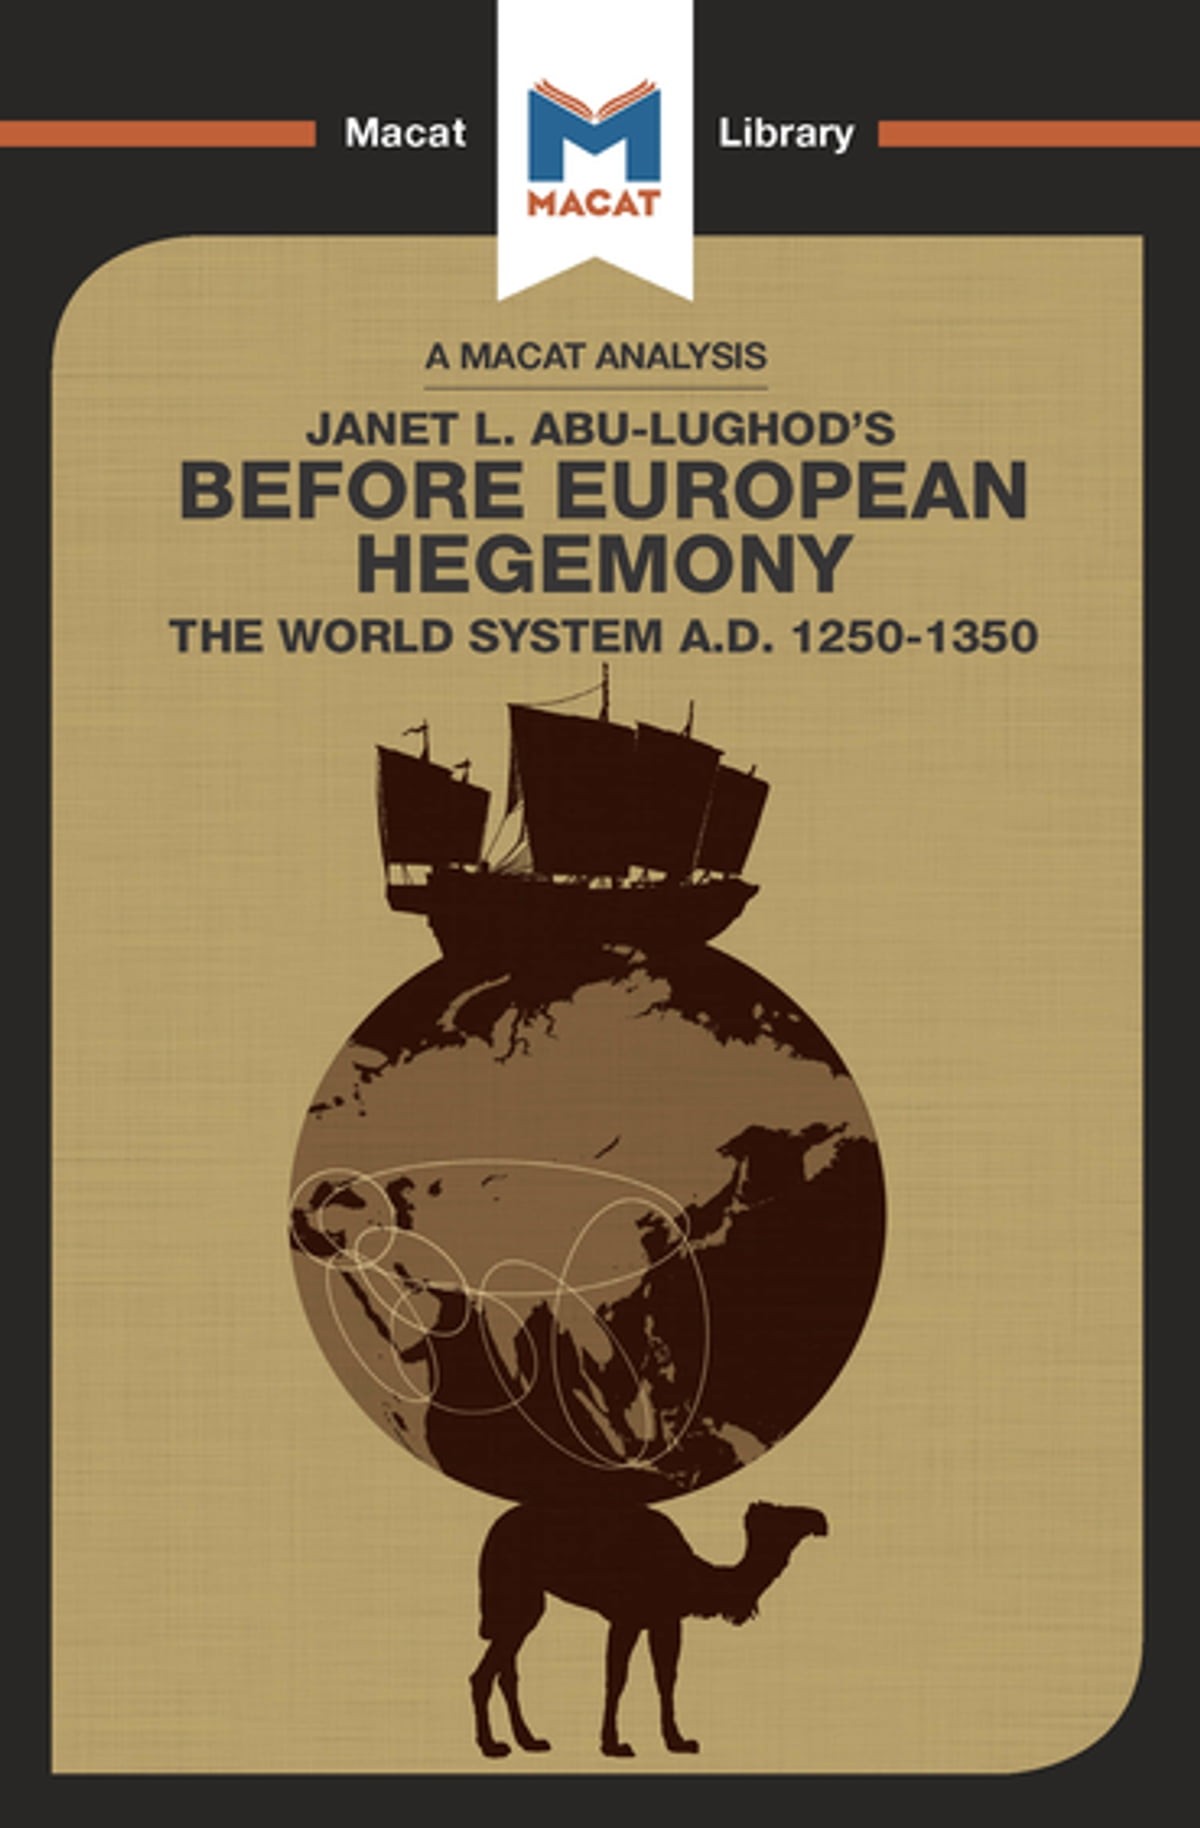 Before European Hegemony: The World System A.D. 1250-1350